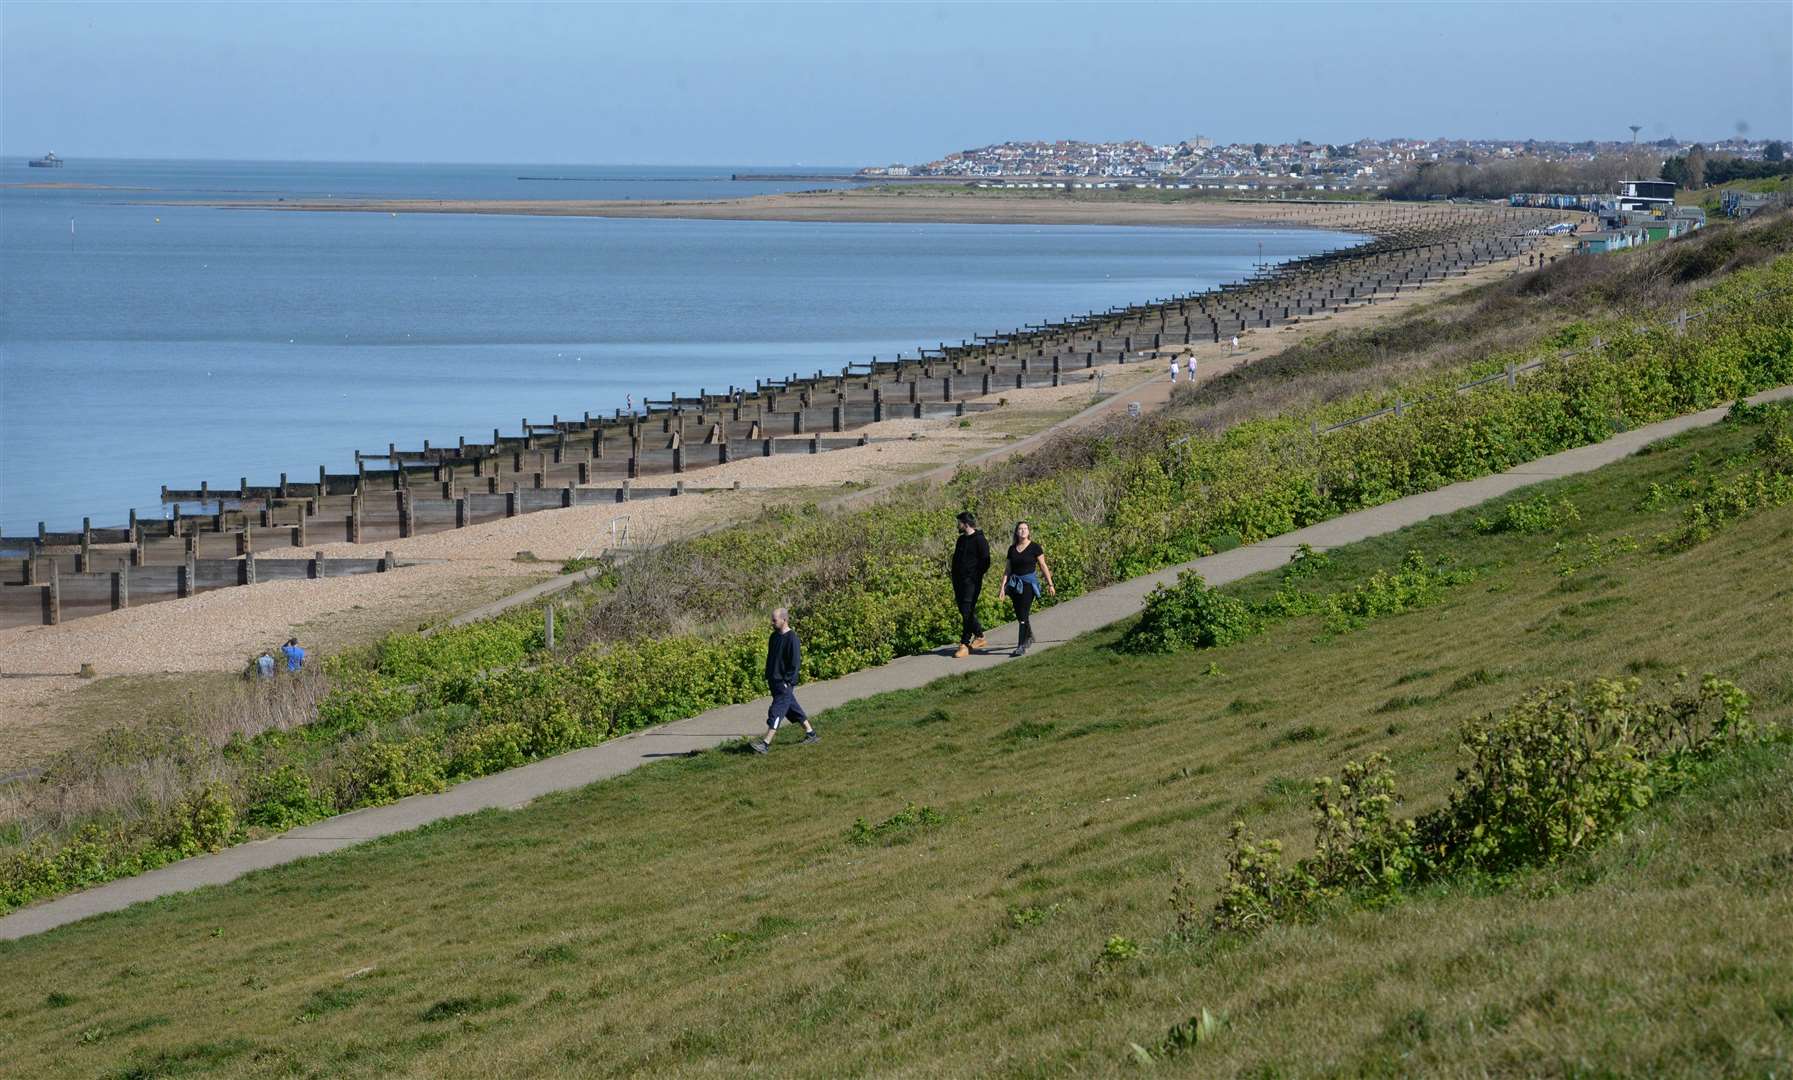 The seaside slopes will be taken over by a host of food and drink stalls